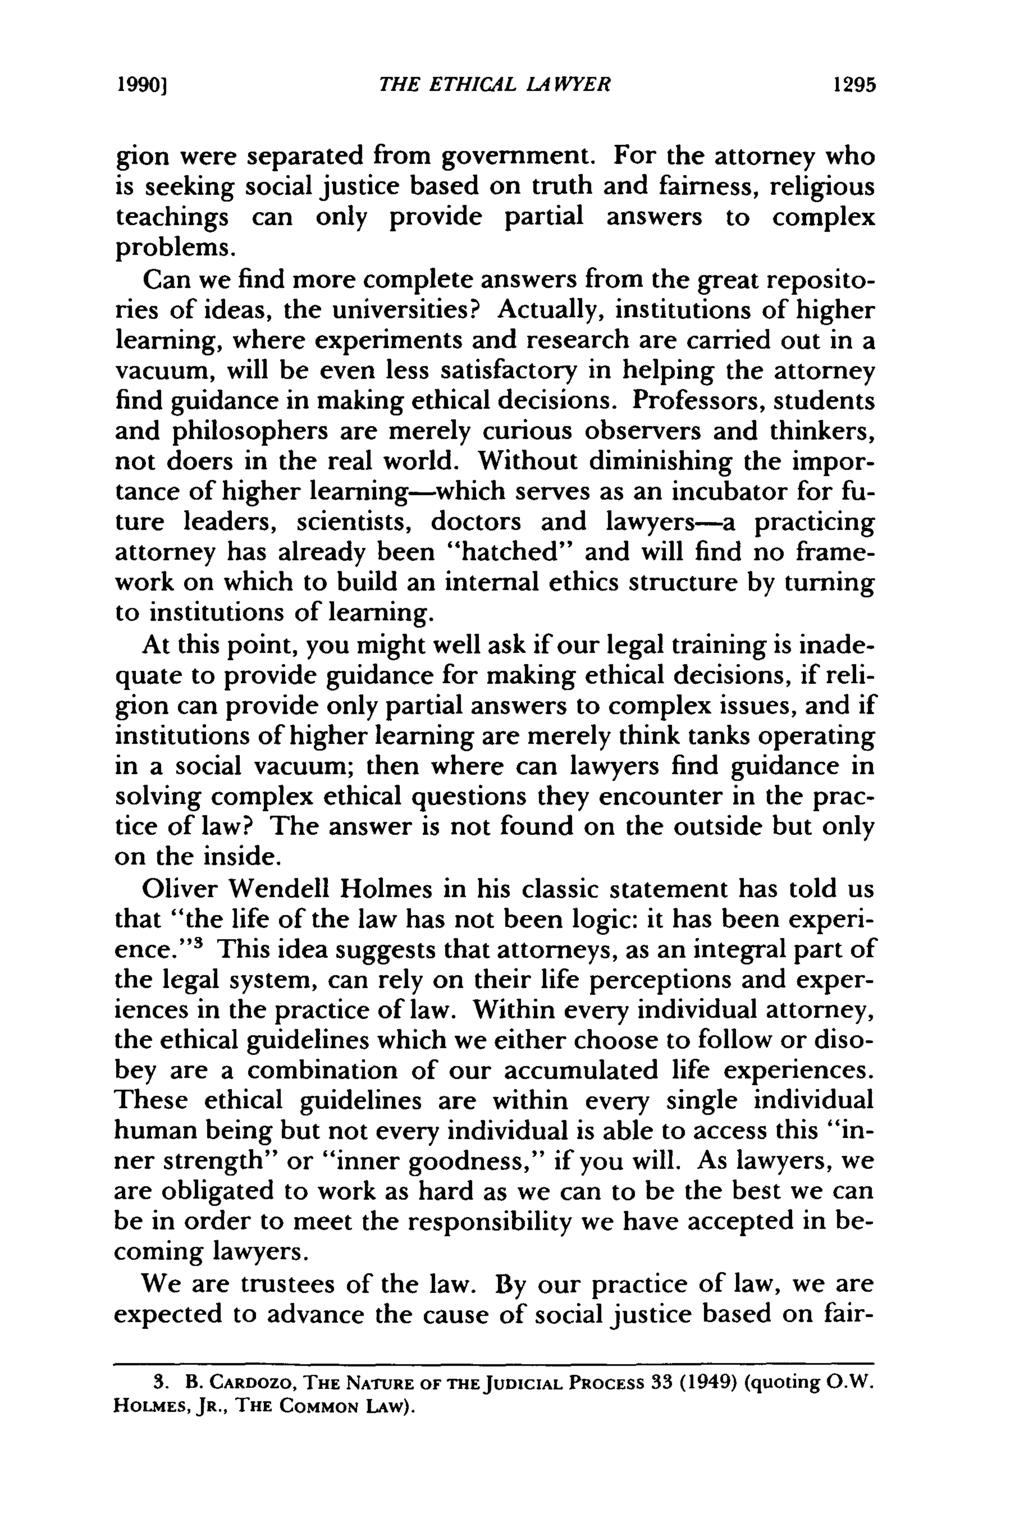 1990] Brown: The Ethical Lawyer Contradiction in Terms or Reality? THE ETHICAL LAWYER gion were separated from government.